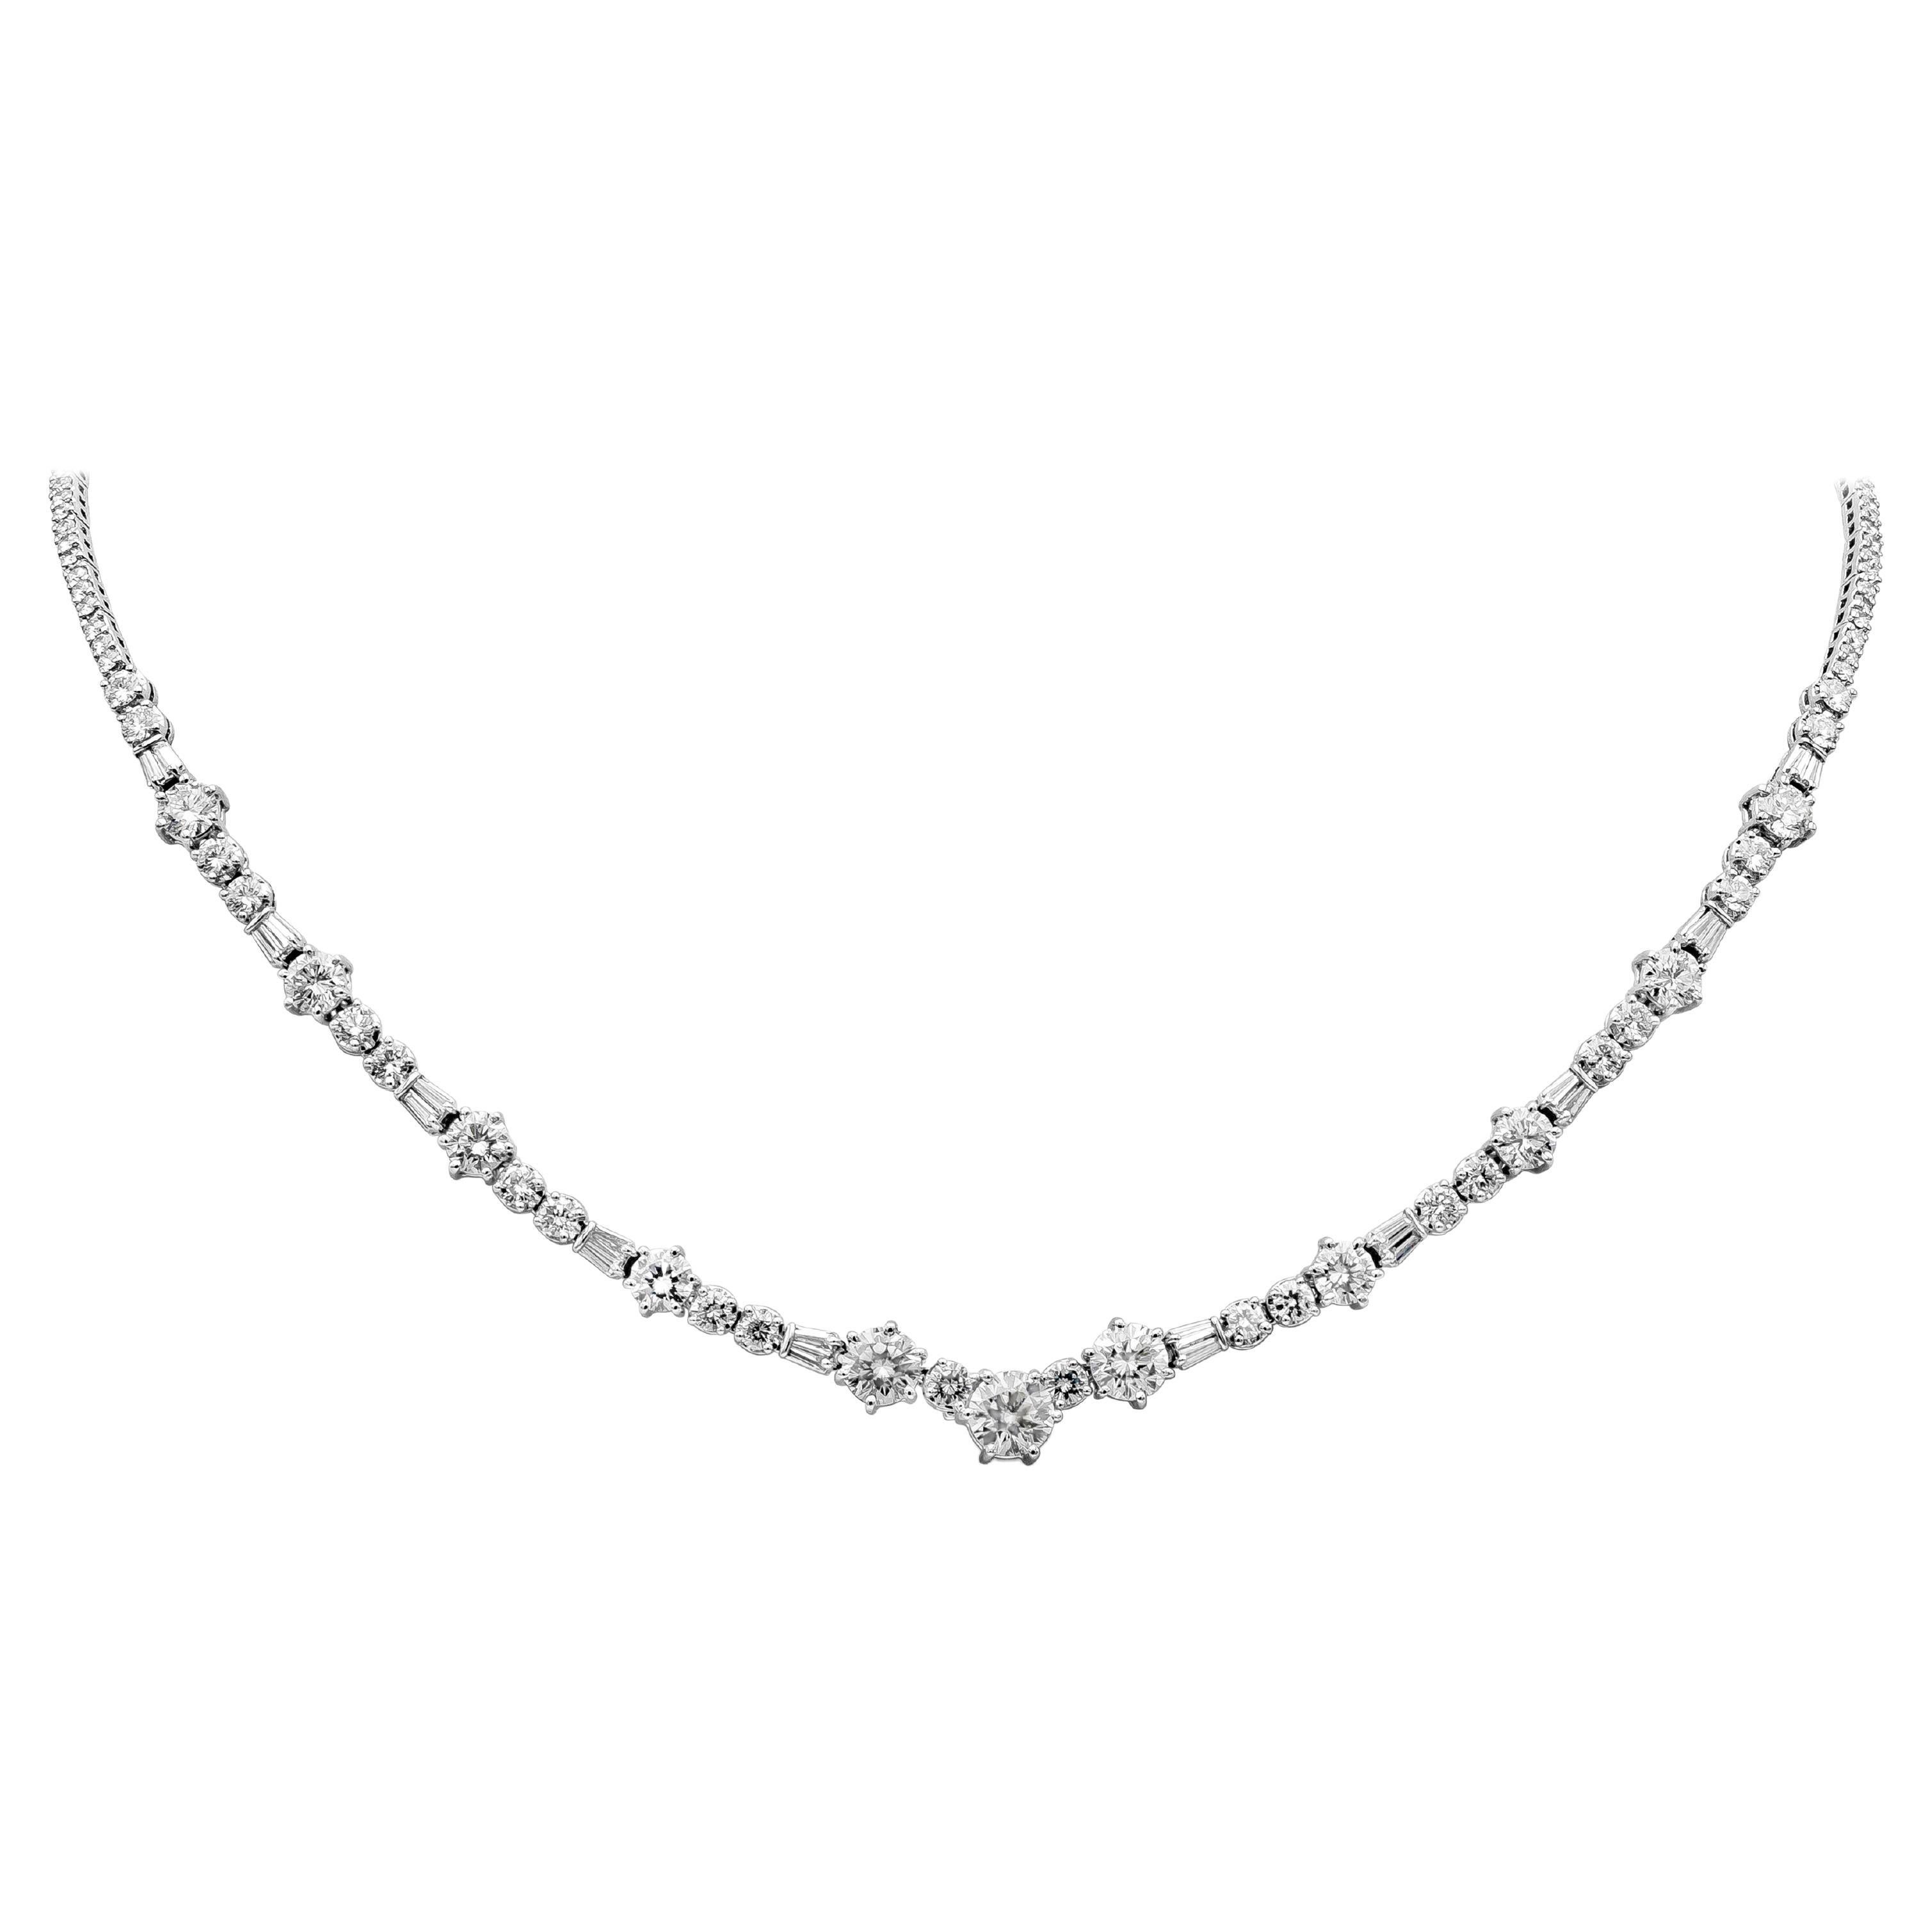 Roman Malakov, 8.71 Carat Total Round And Baguette Diamond Tennis Necklace For Sale